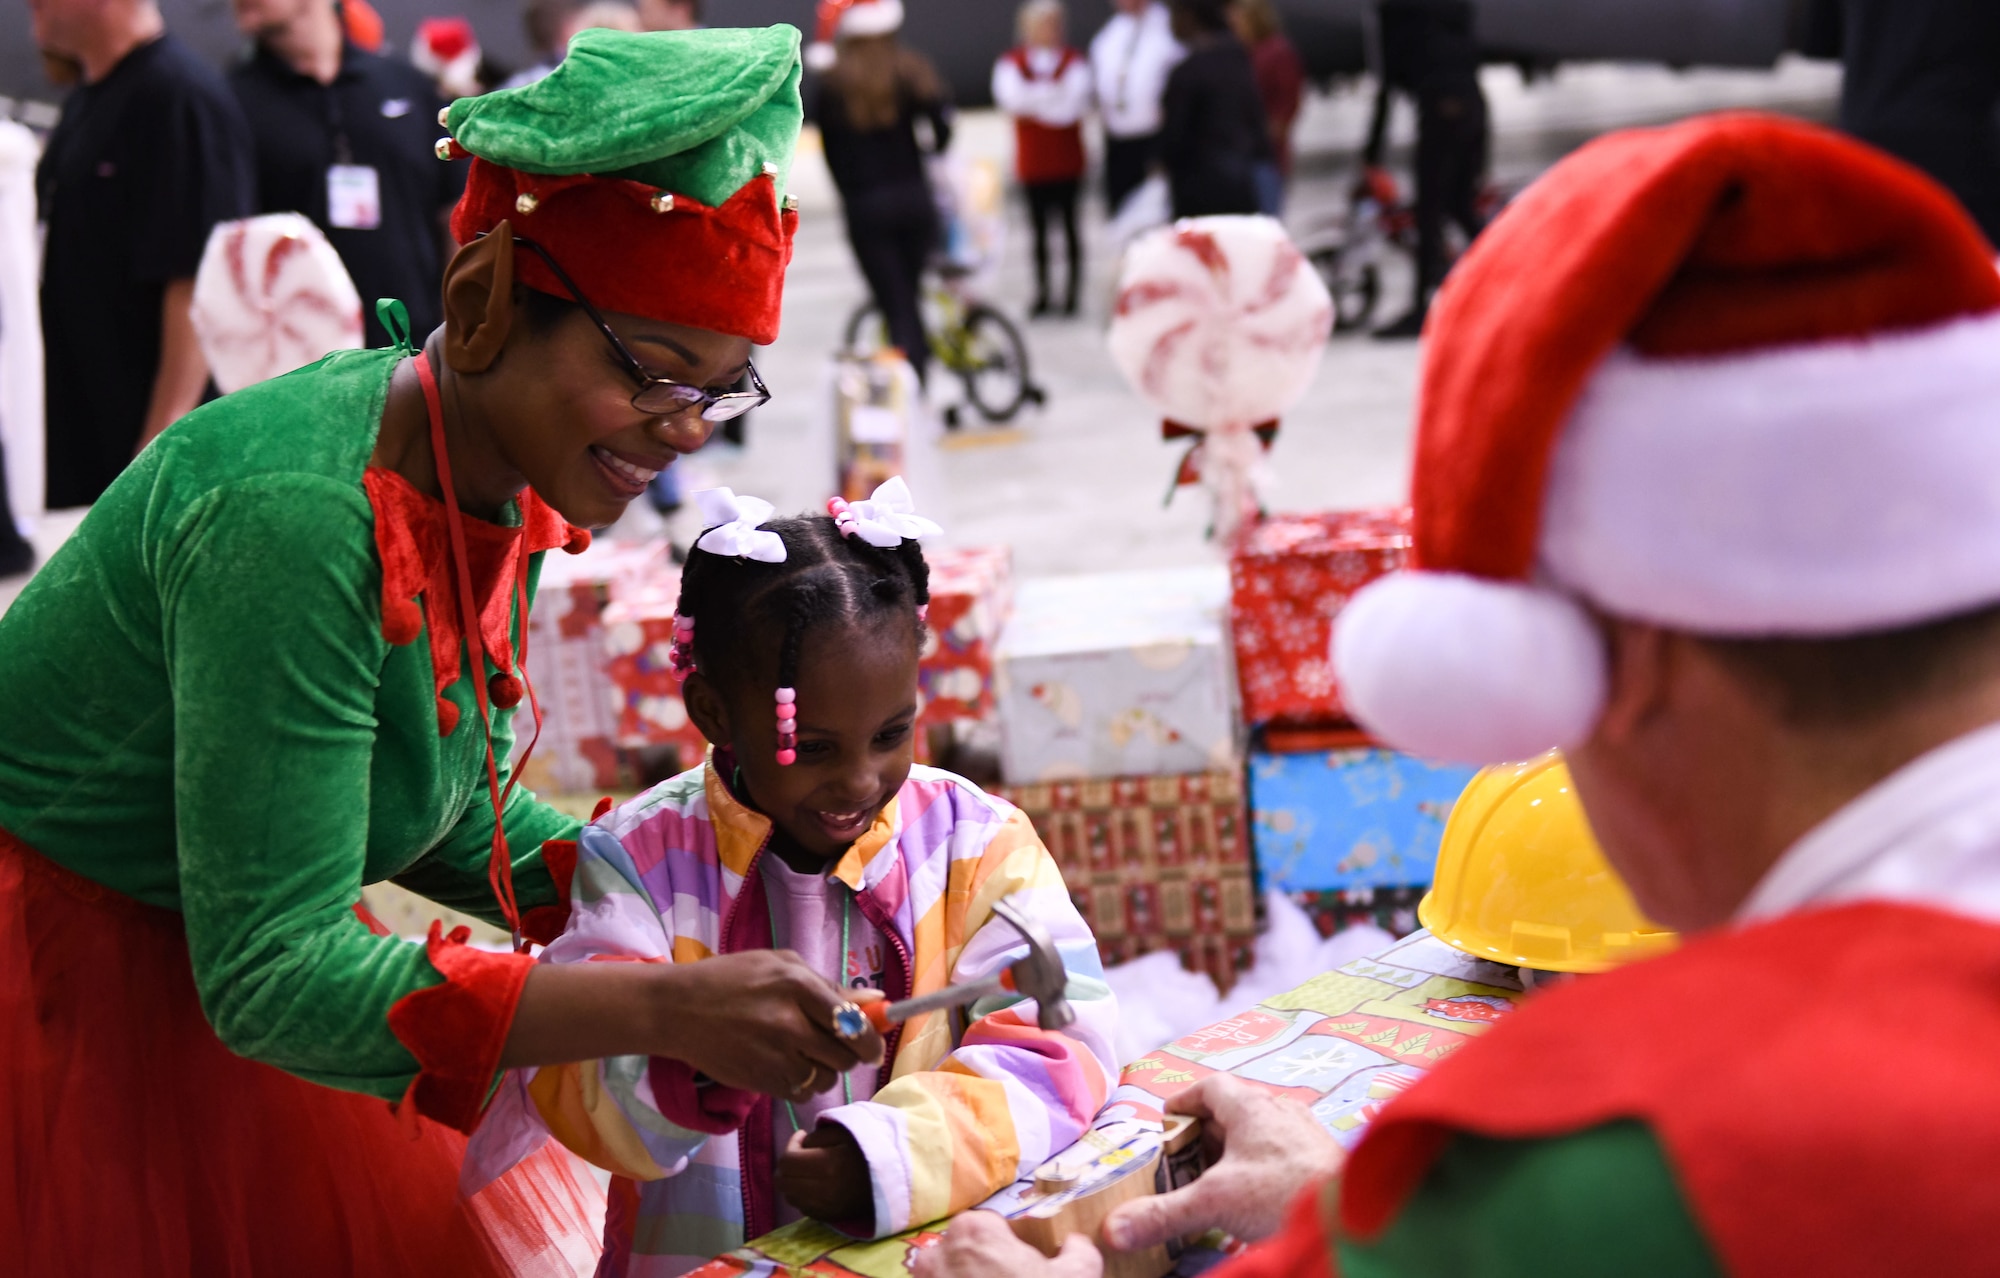 An “elfscort” helps a Salvation Army Angel Tree child in a building activity at the Flight to the North Pole at the 172nd Airlift Wing in Jackson, Mississippi, Dec. 13, 2022. Flight to the North Pole is an annual community outreach event benefiting the Salvation Army Angel Tree program, hosted by the 172nd Airlift Wing, Jackson Mississippi Metro Area Salvation Army and local volunteers. (U.S. Air National Guard photo by Airman 1st Class Shardae McAfee)